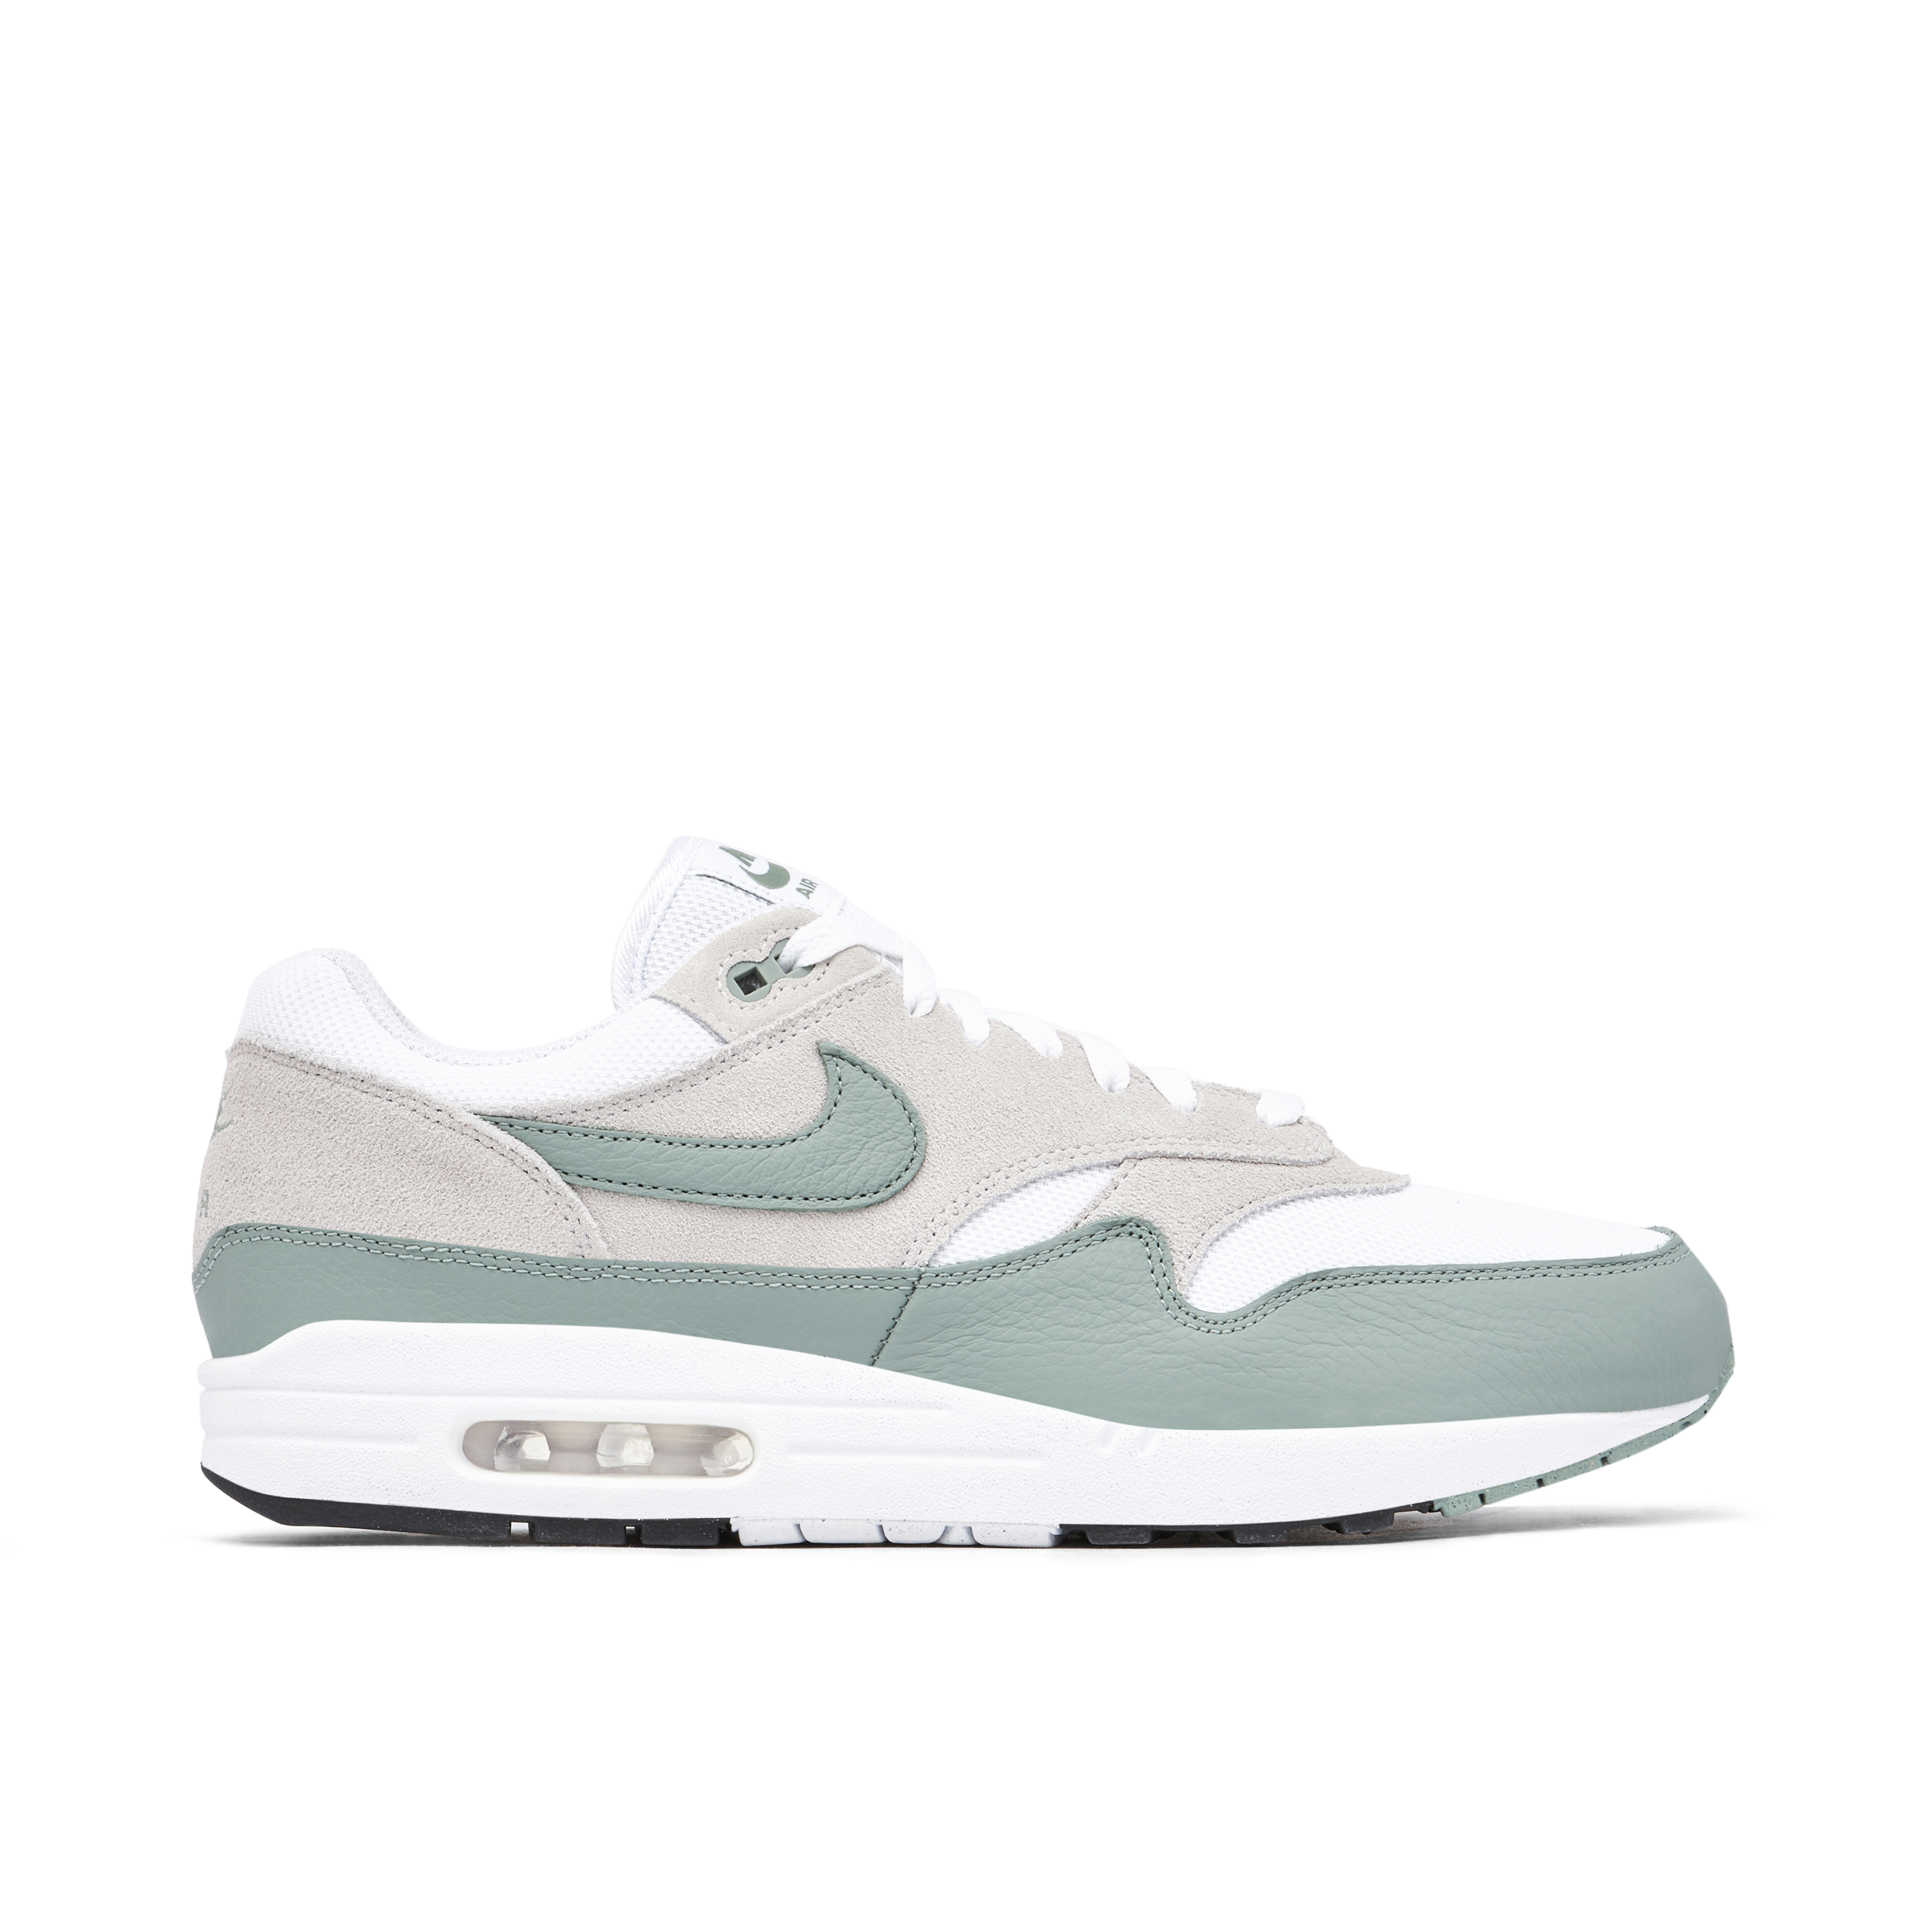 Nike Air Max 1 x Patta Noise Aqua (without Bracelet) | DH1348-004 | Laced